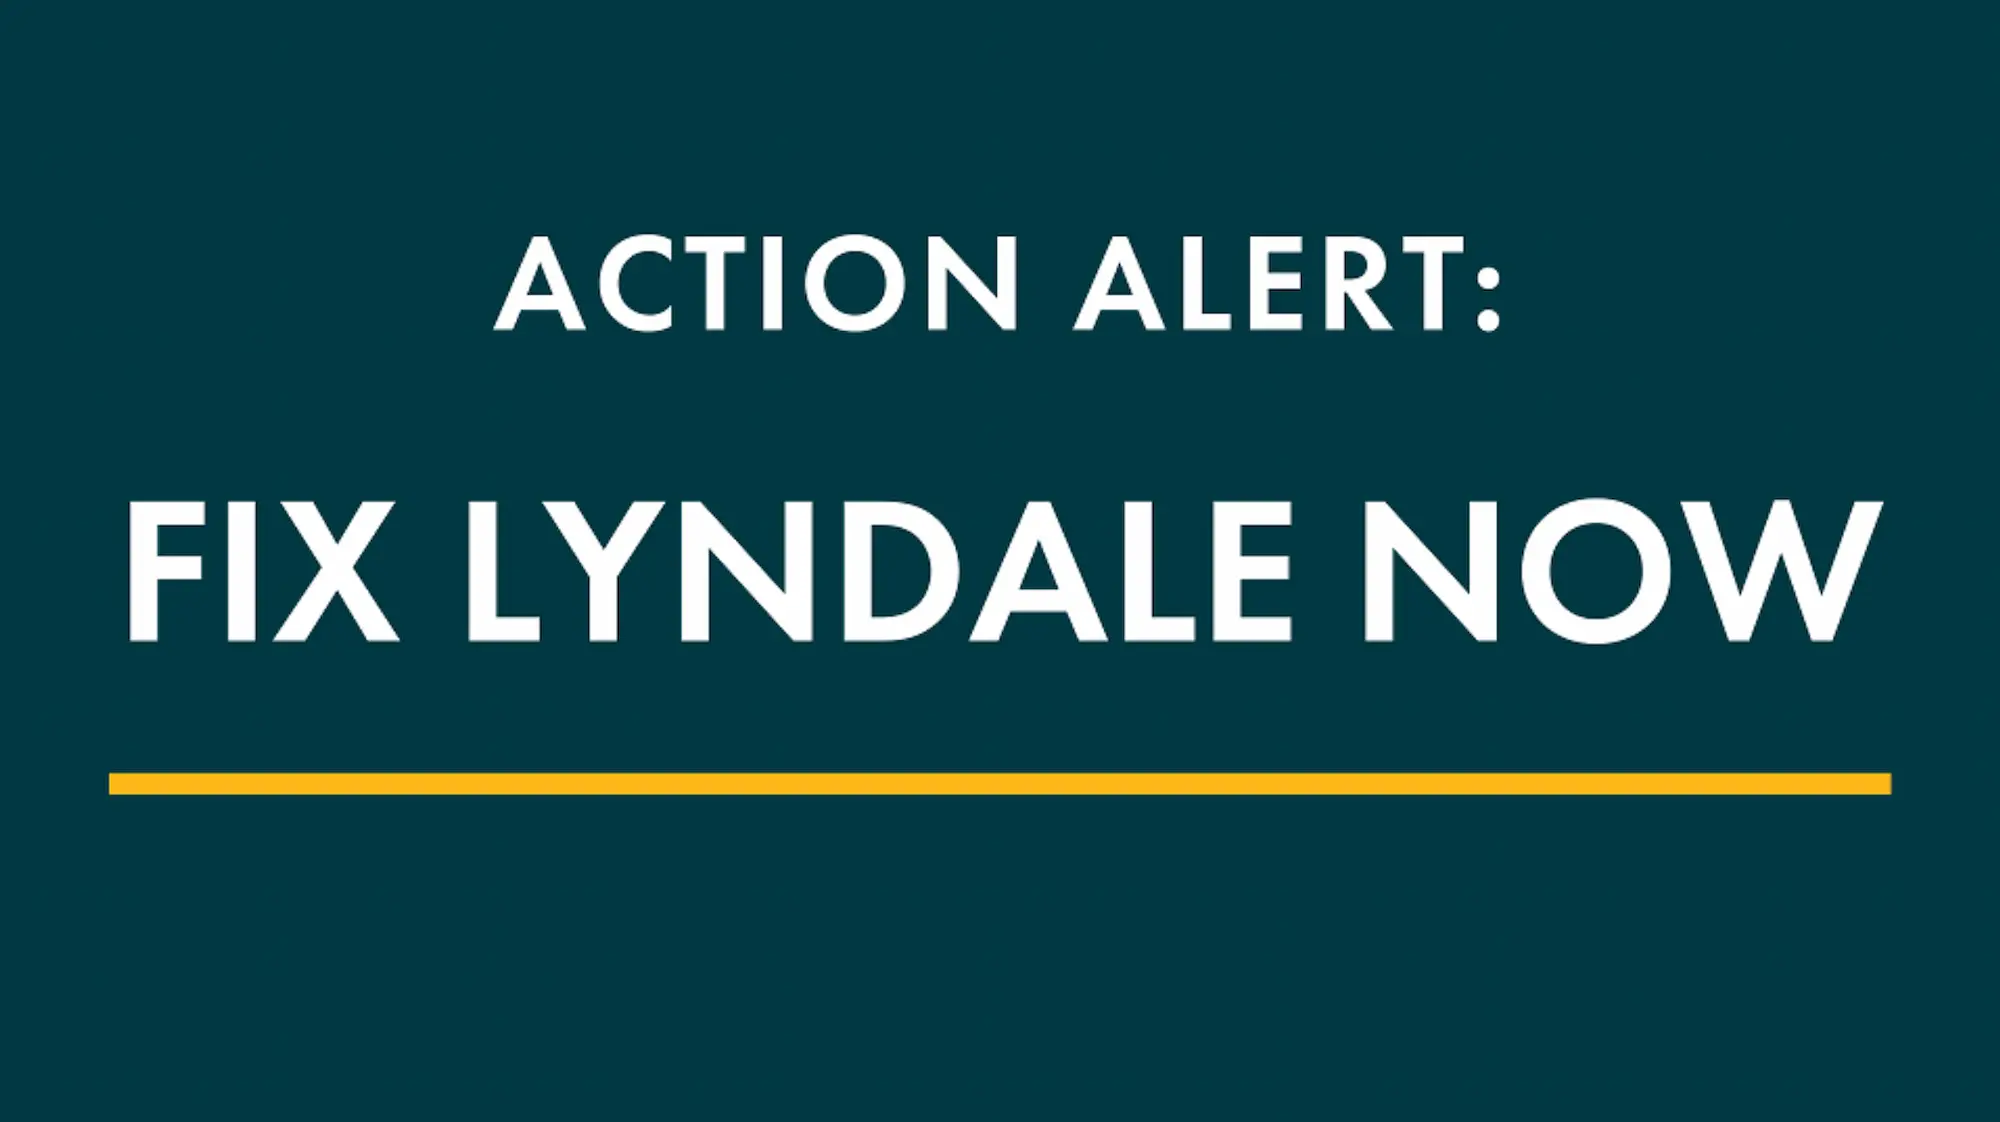 image with text that reads "action alert: fix lyndale now"